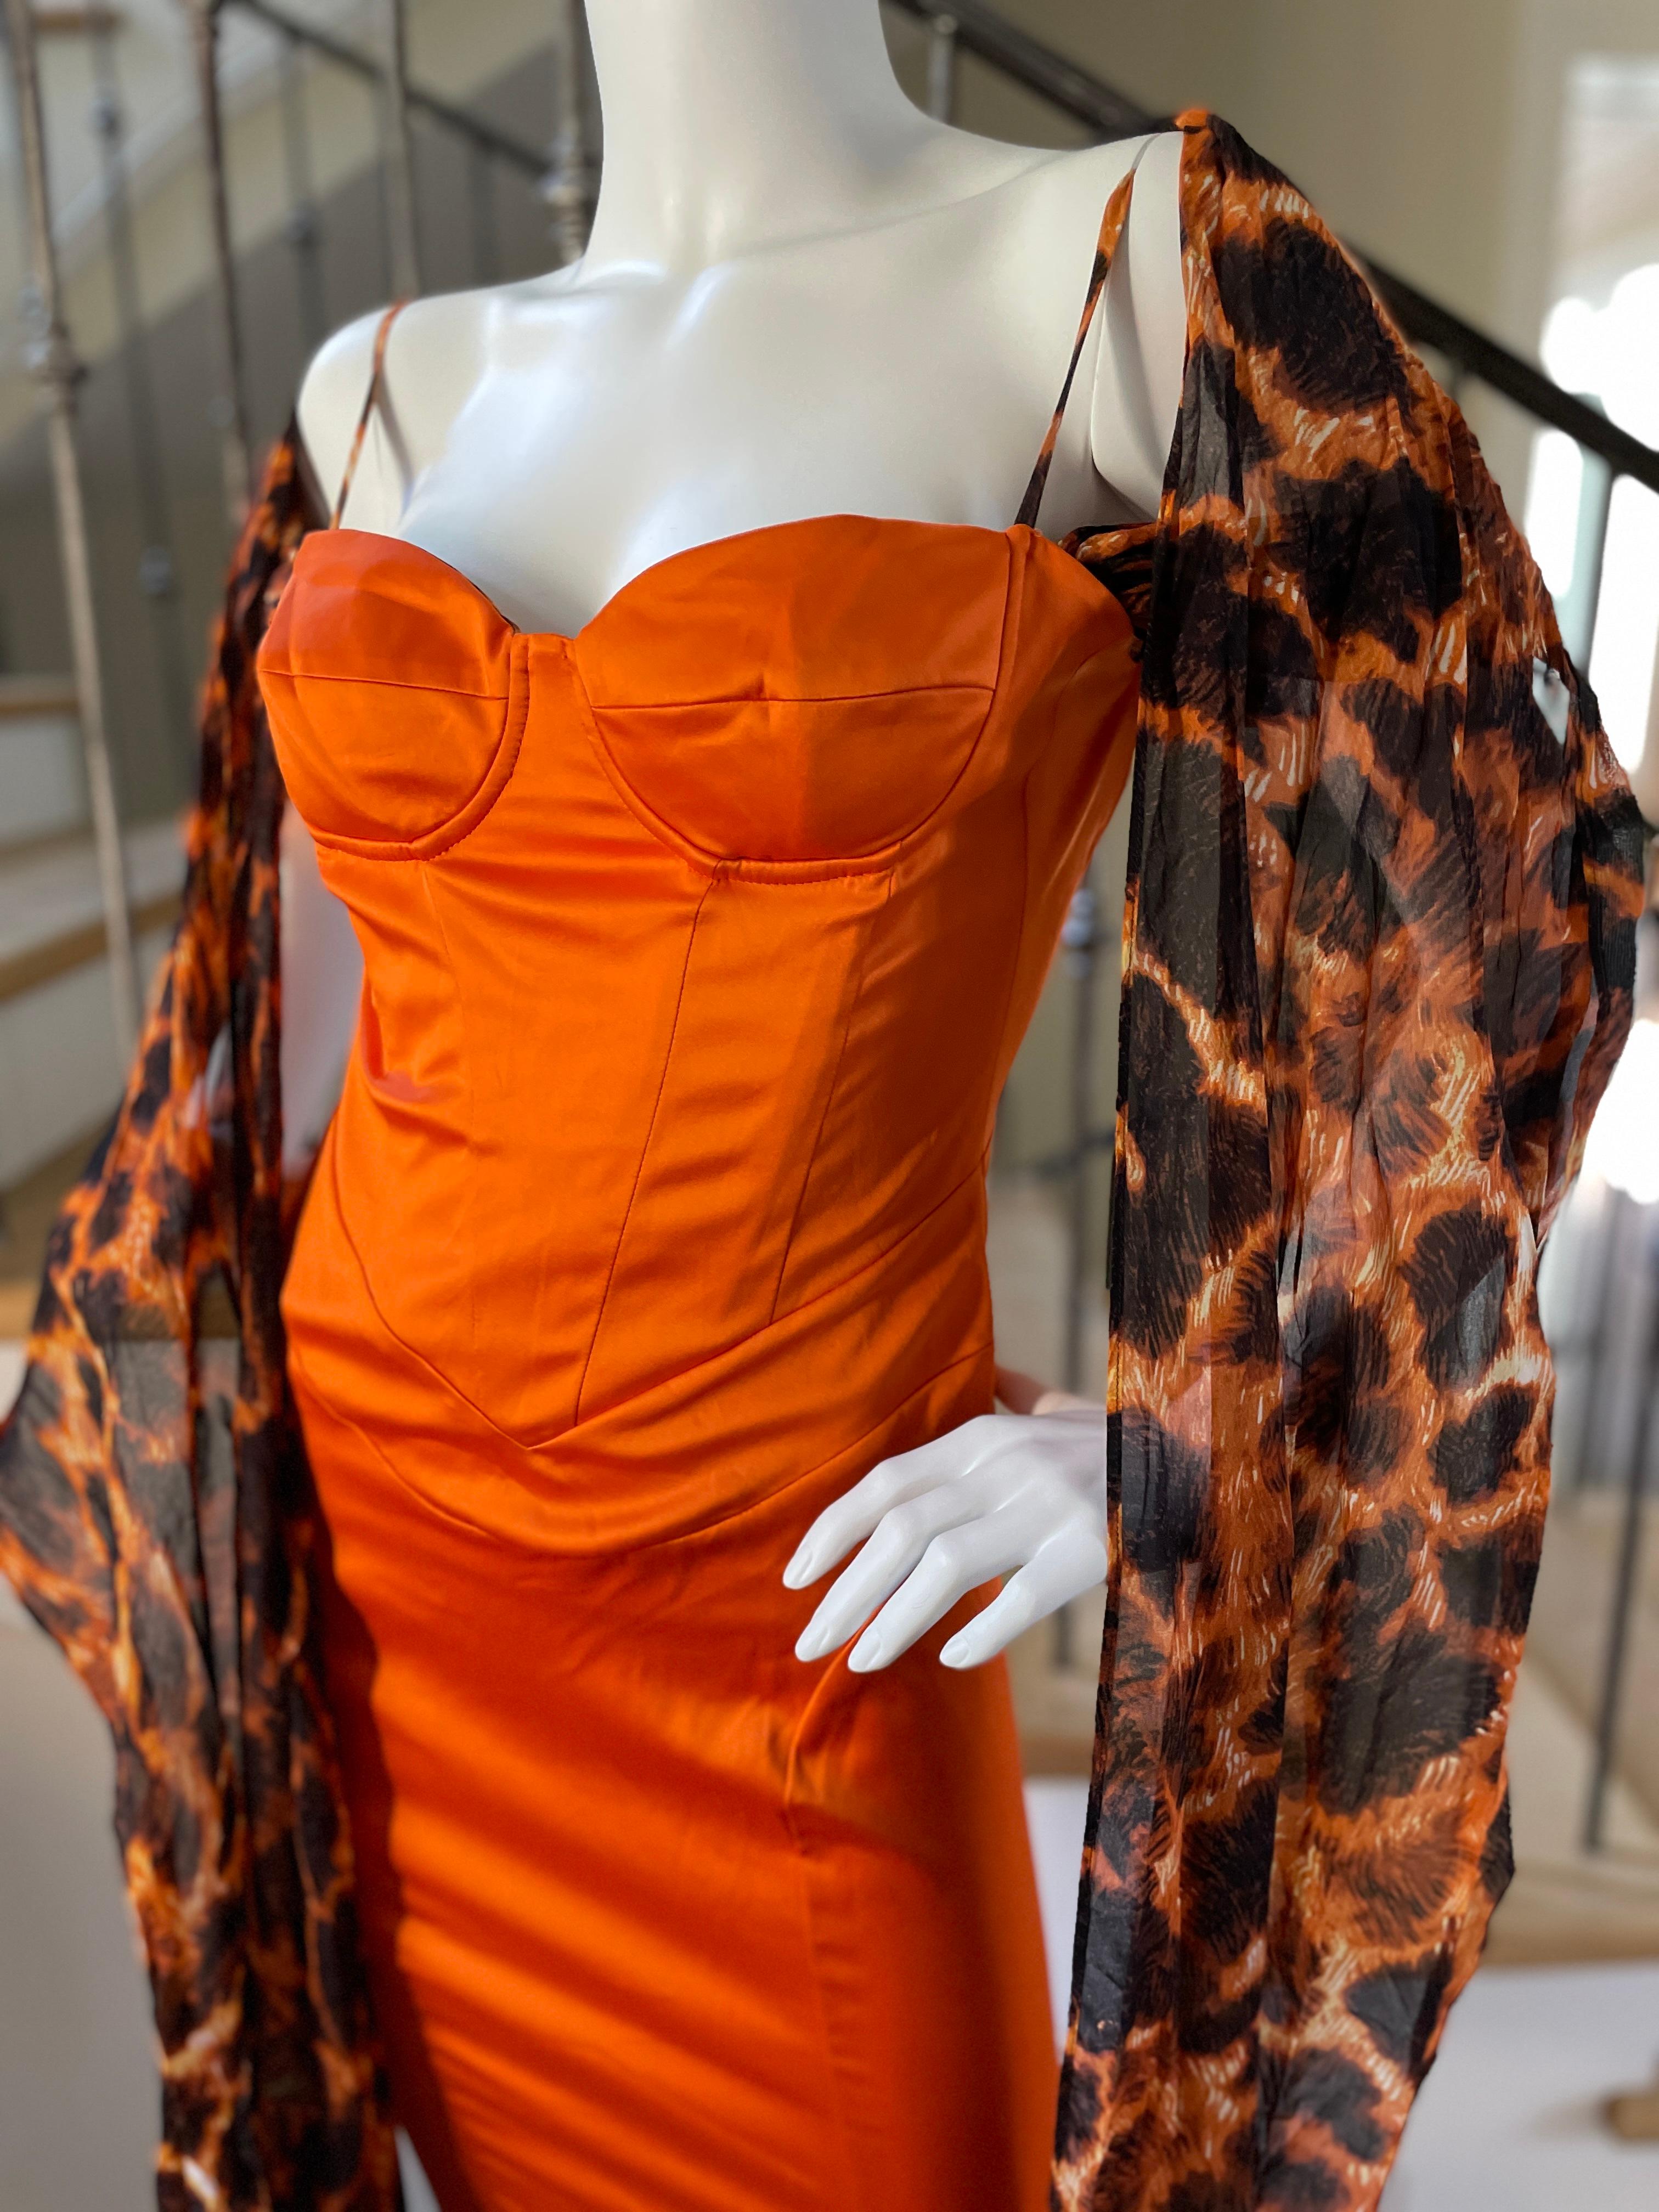 Just Cavalli Vintage Orange Corset Dress with Attached Animal Print Scarves .
Size 38 , runs small
Bust 32